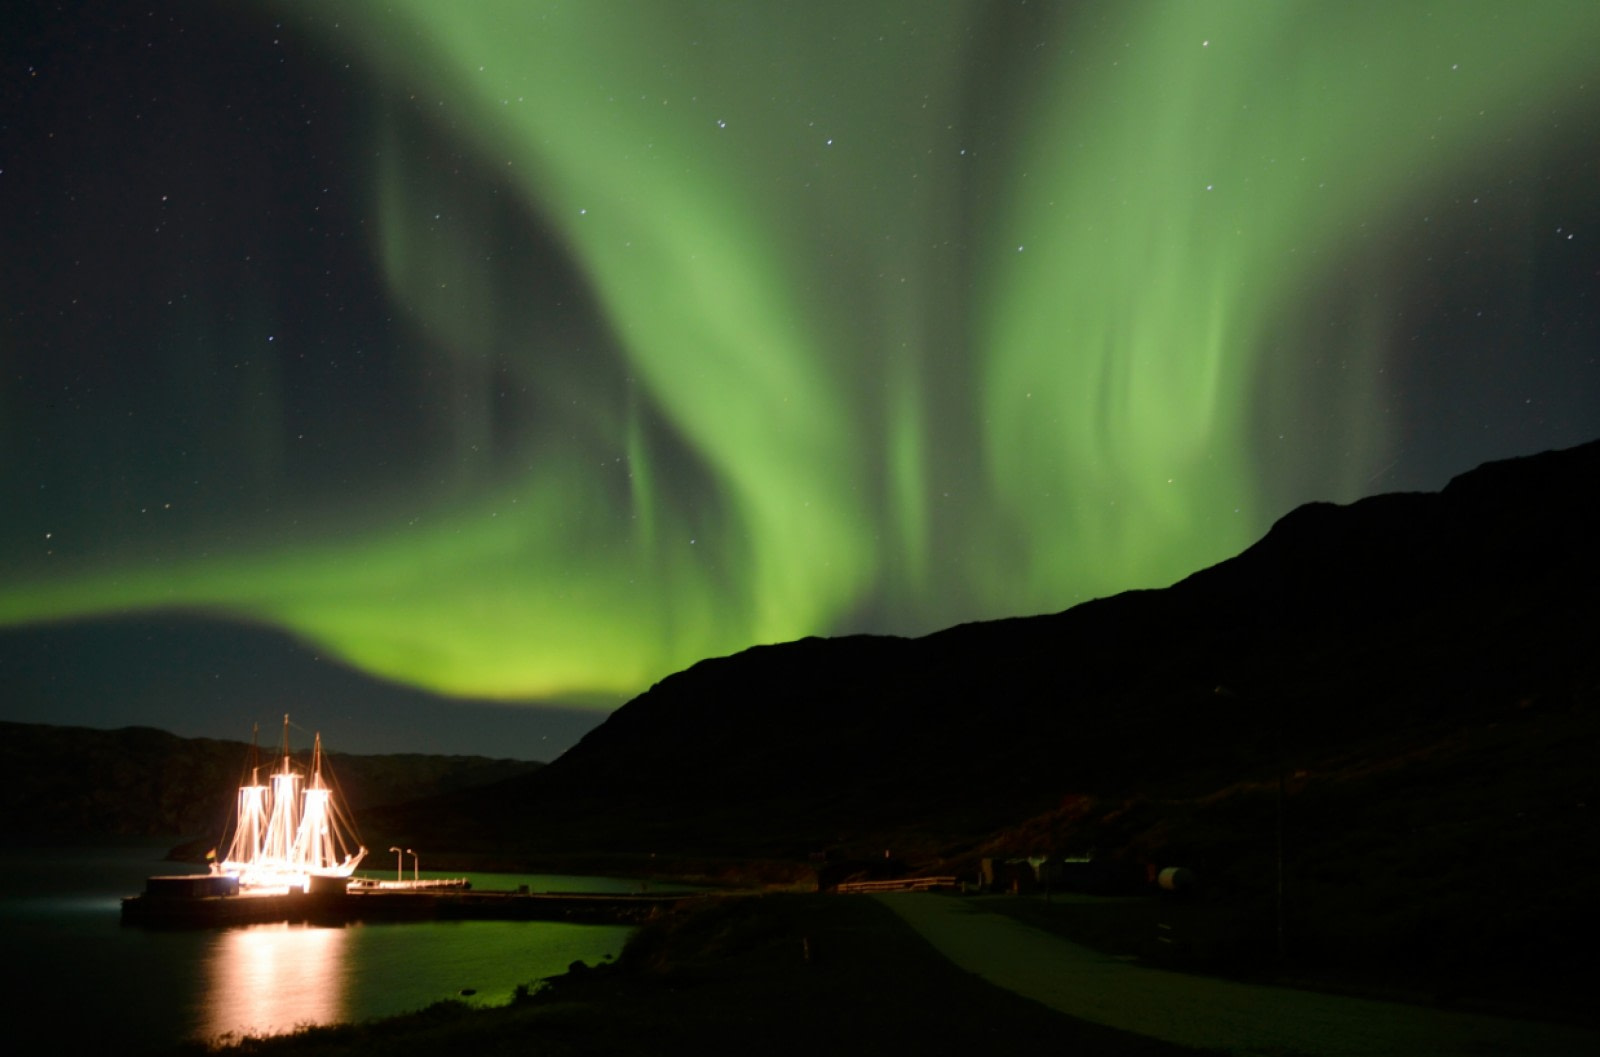 Aurora Borealis Lights Skies Over North America and Europe - The